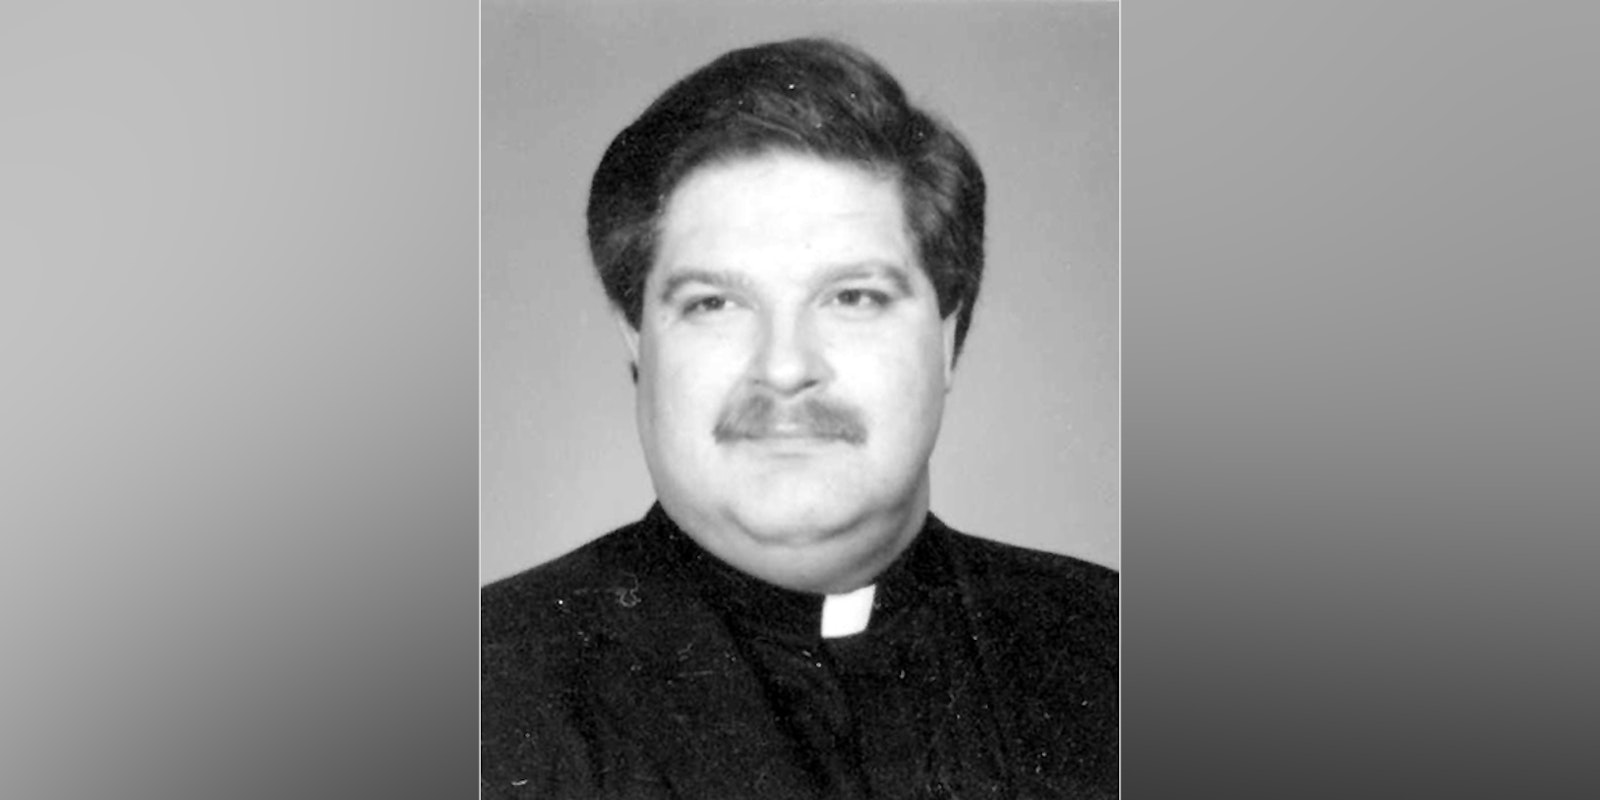 Fr. Babich was on the quiet side, but went out of his way to make parishioners feel welcome. He loved to bake and travel, bringing back apples and treats from Up North for the parish staff. (Archdiocese of Detroit file photo)